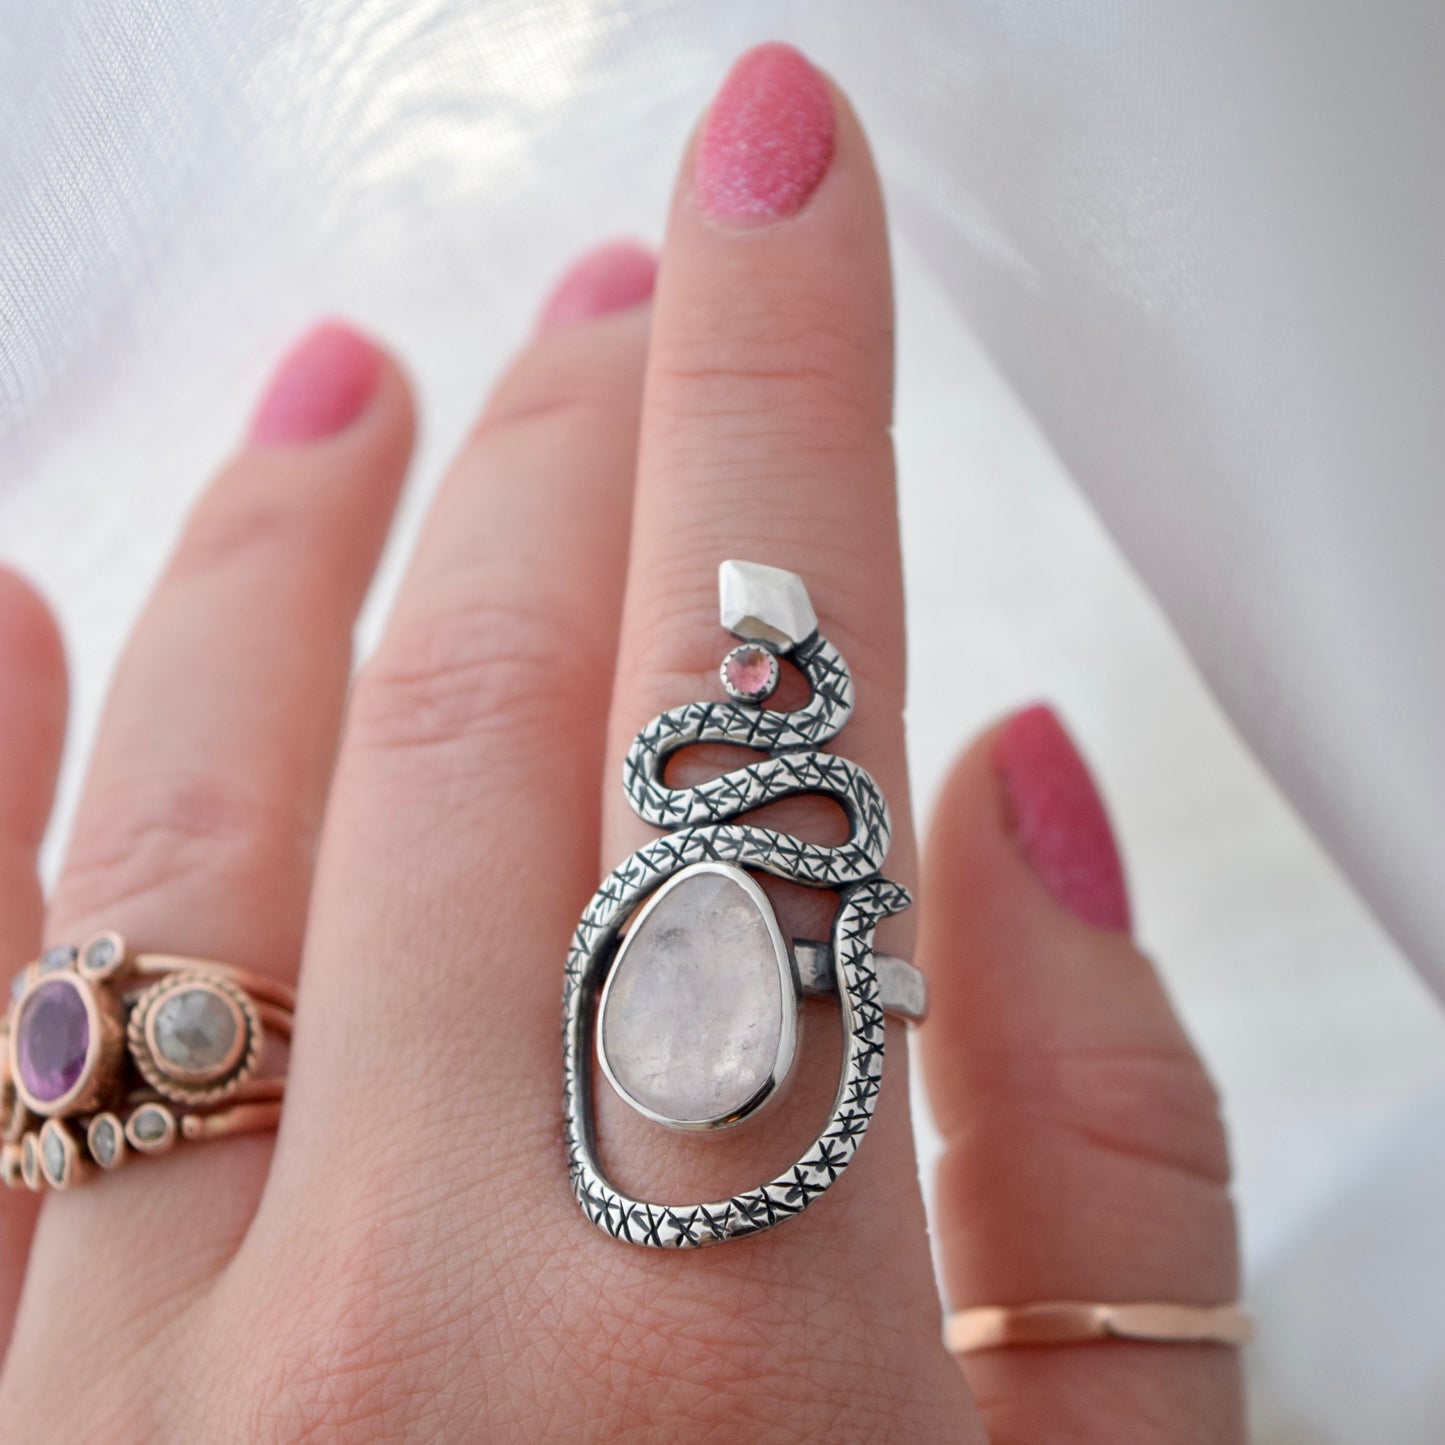 Serpent Ring with Morganite and Tourmaline size 7.75